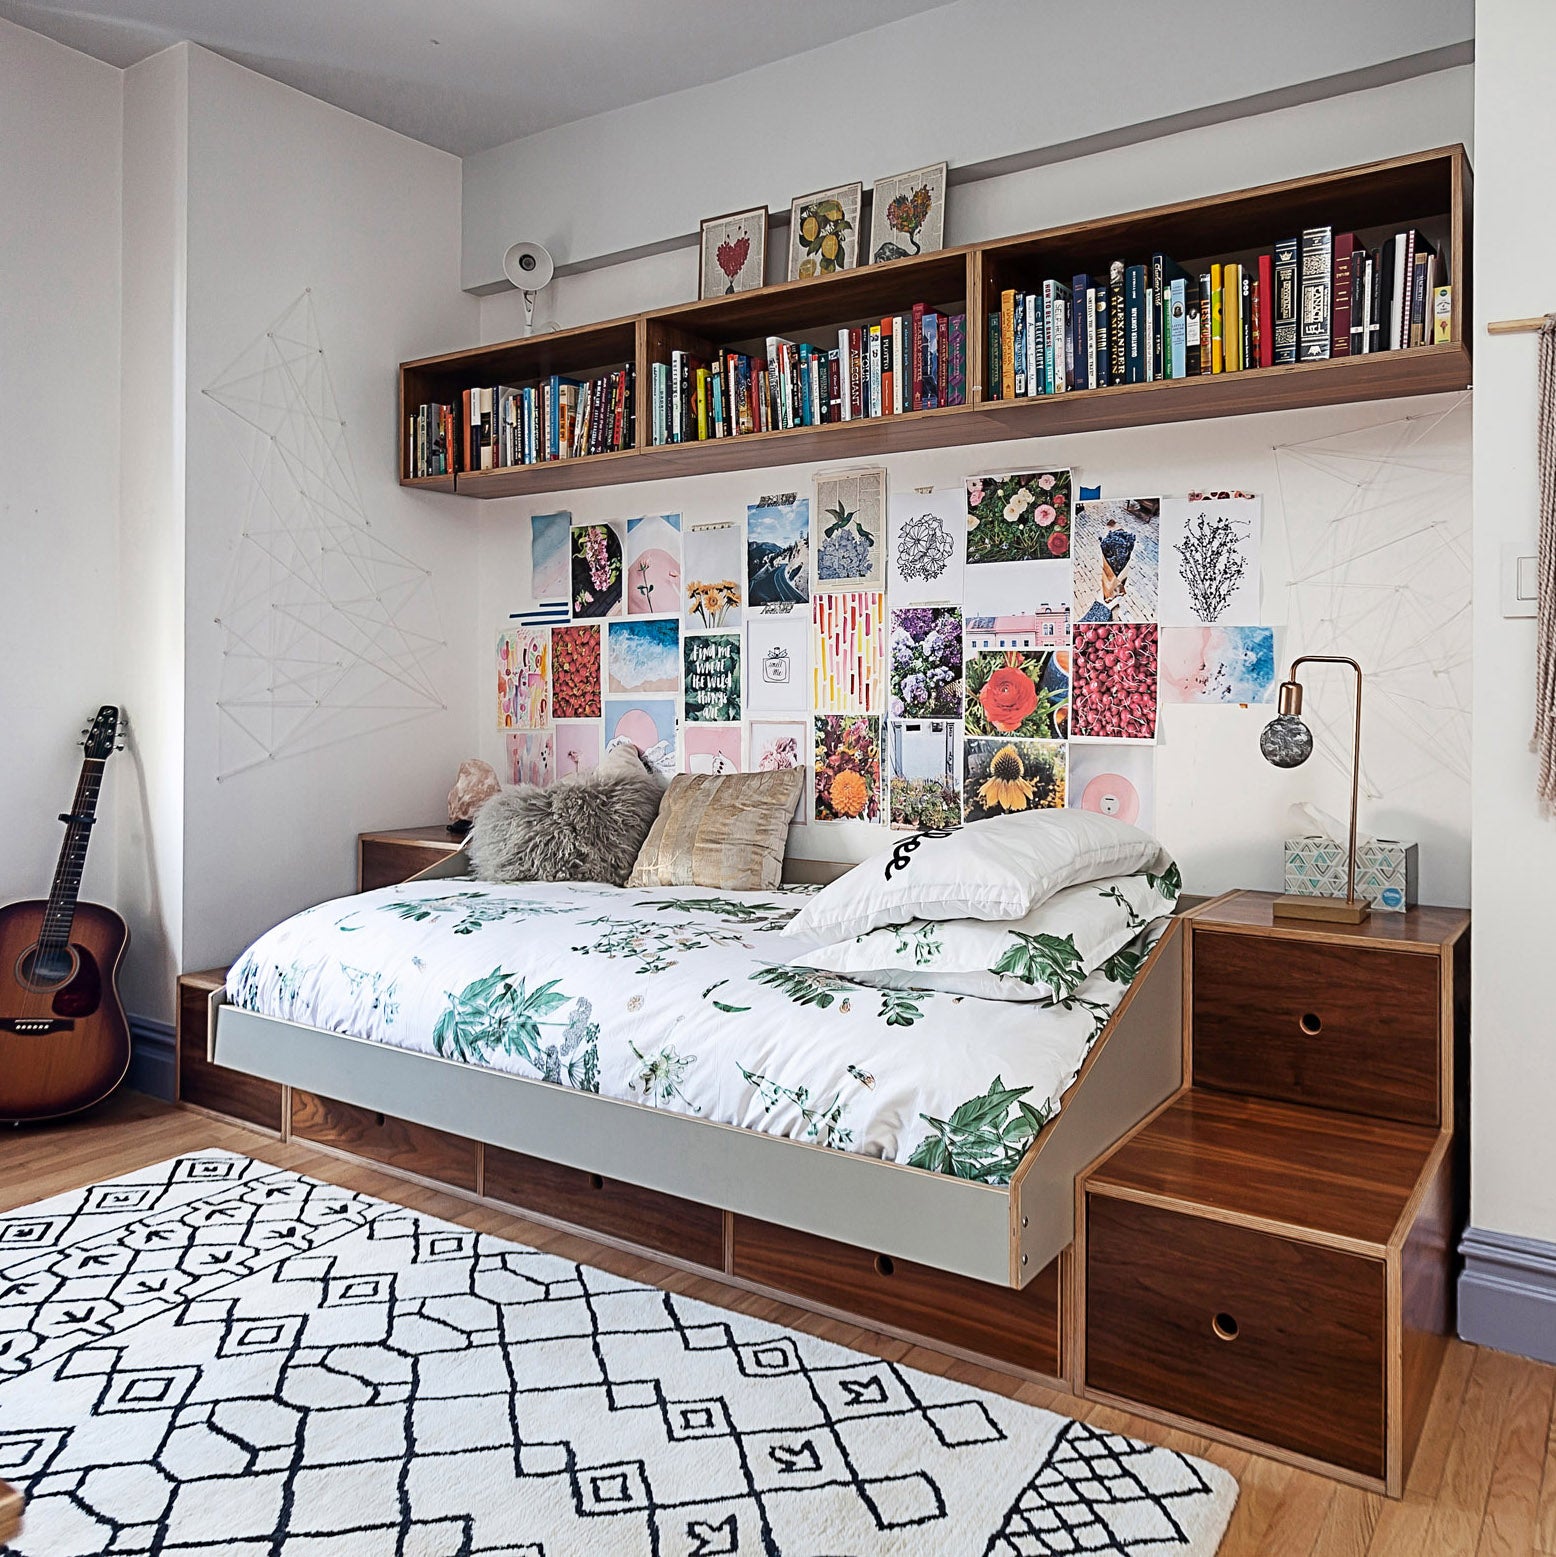 Cozy bedroom with a full-size bed, botanical bedding, wall filled with art and books, and a geometric rug.